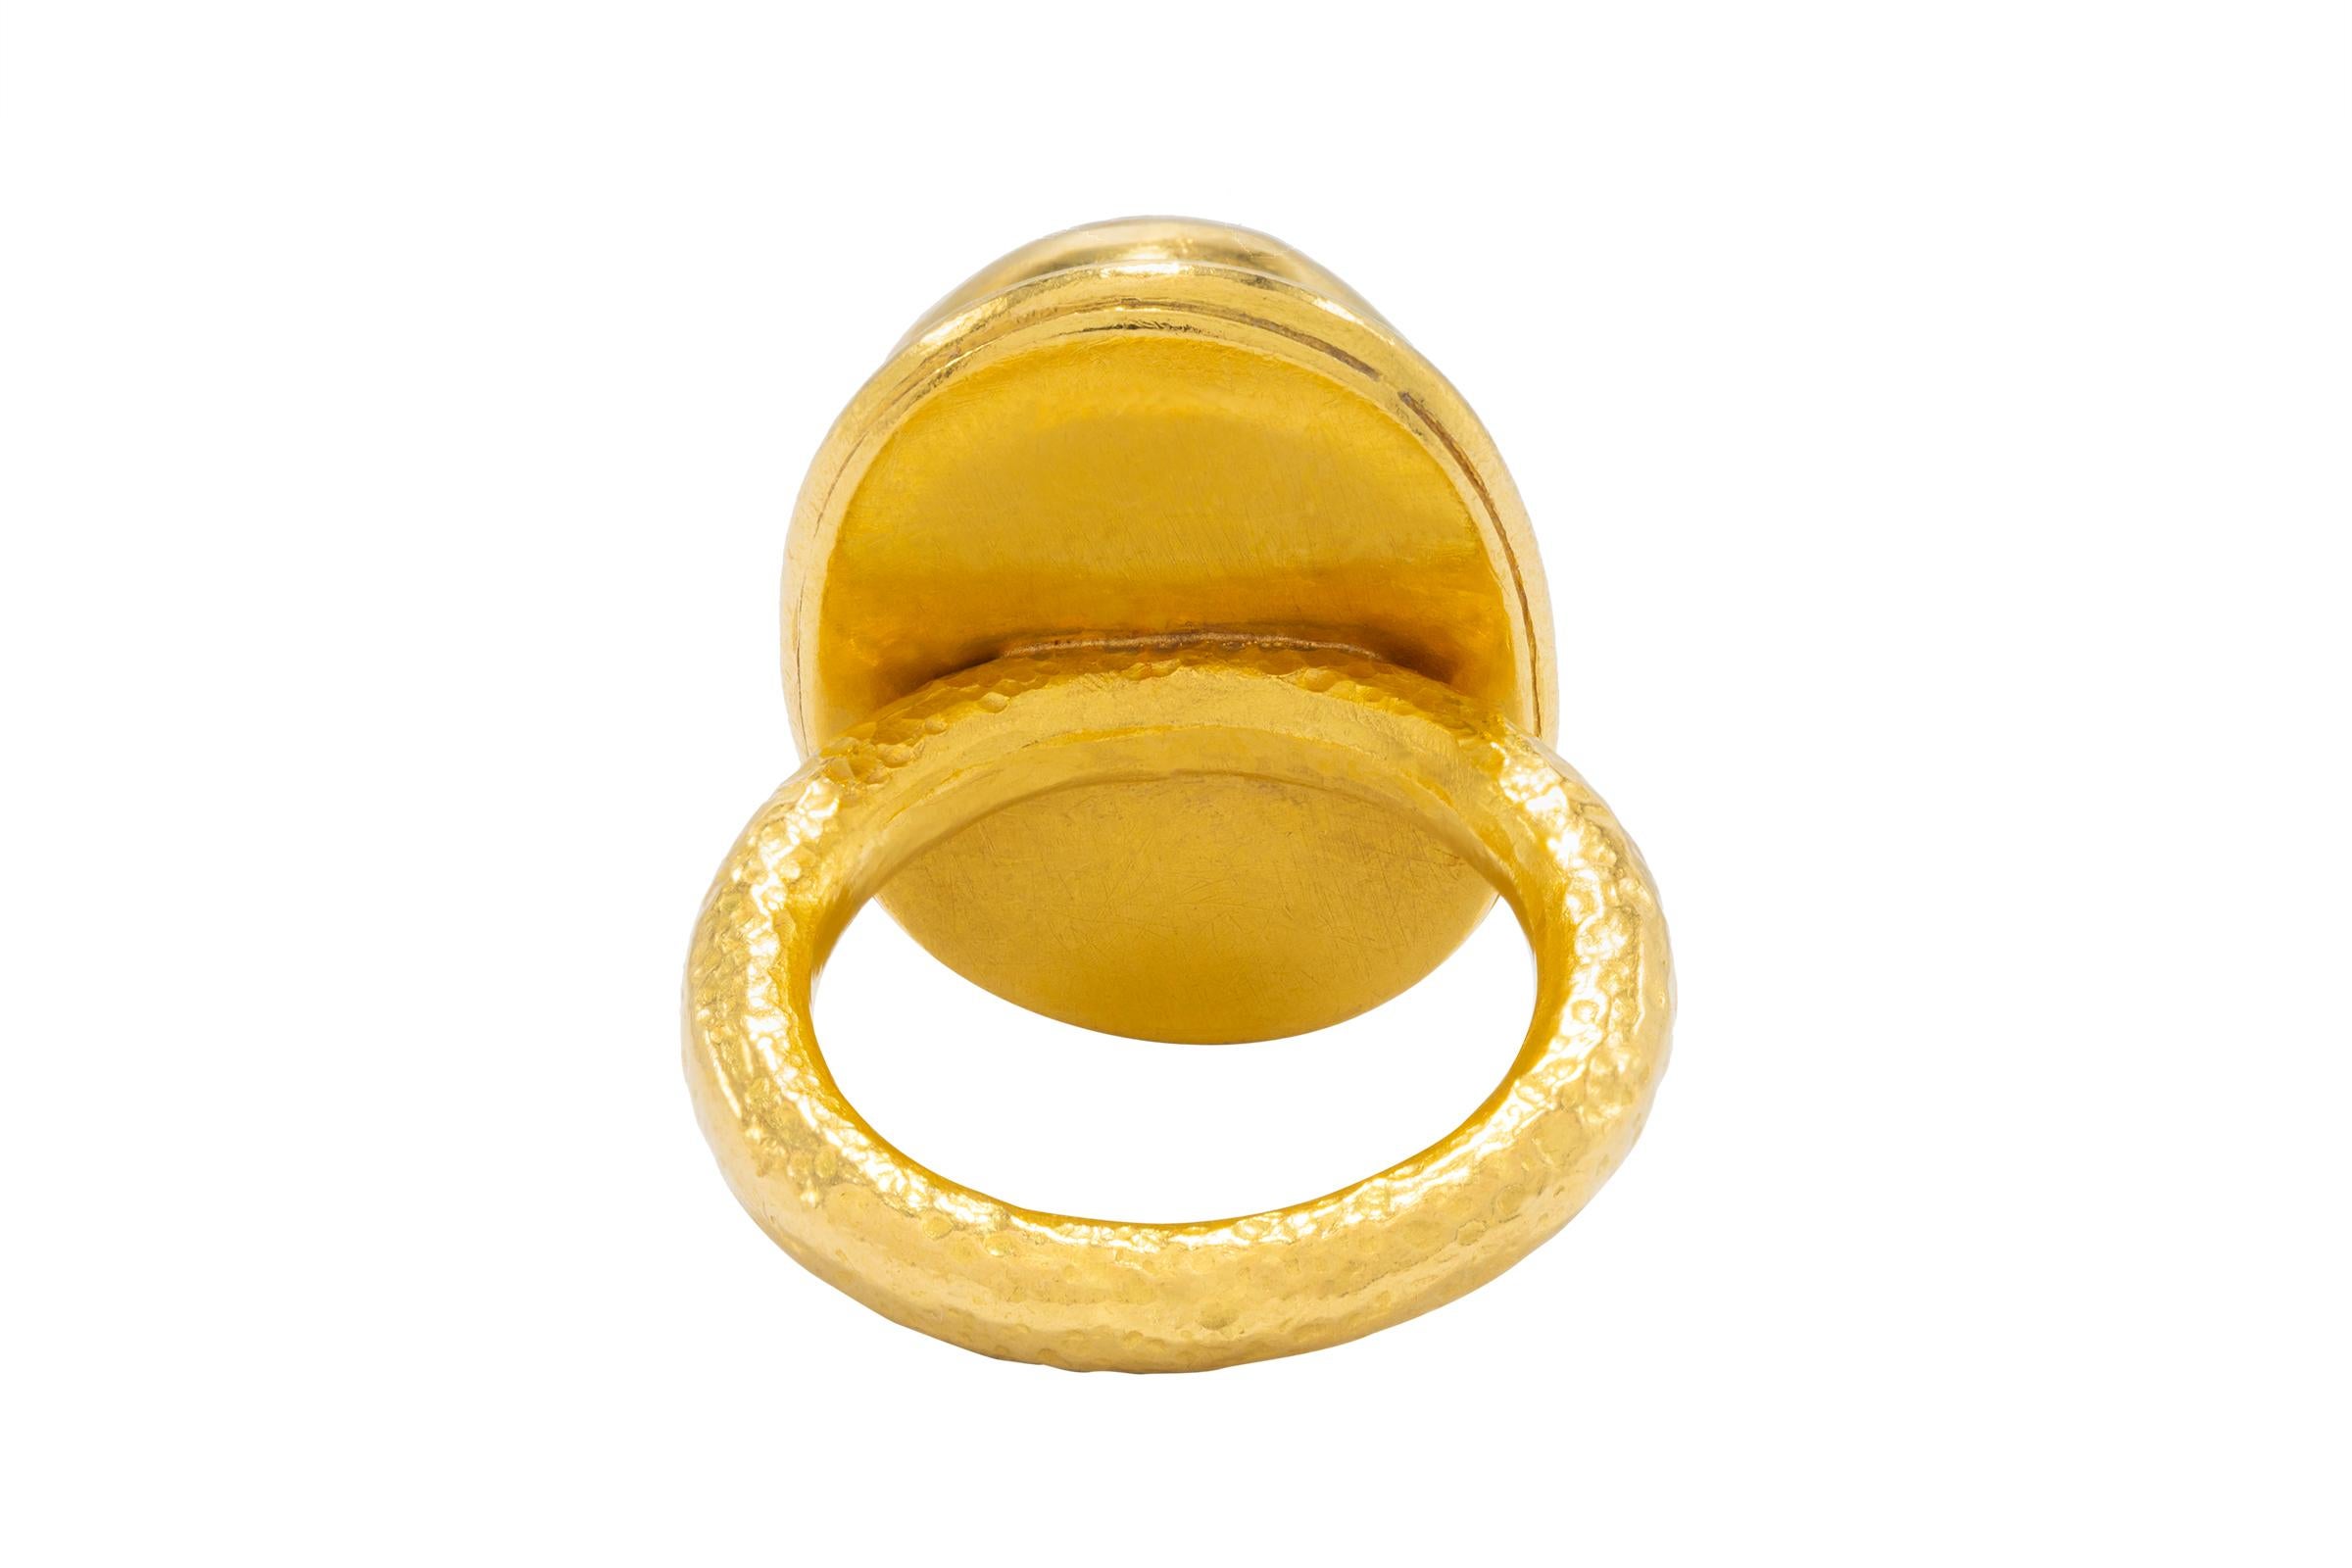 Women's Tourmaline Cocktail Ring, by Tagili